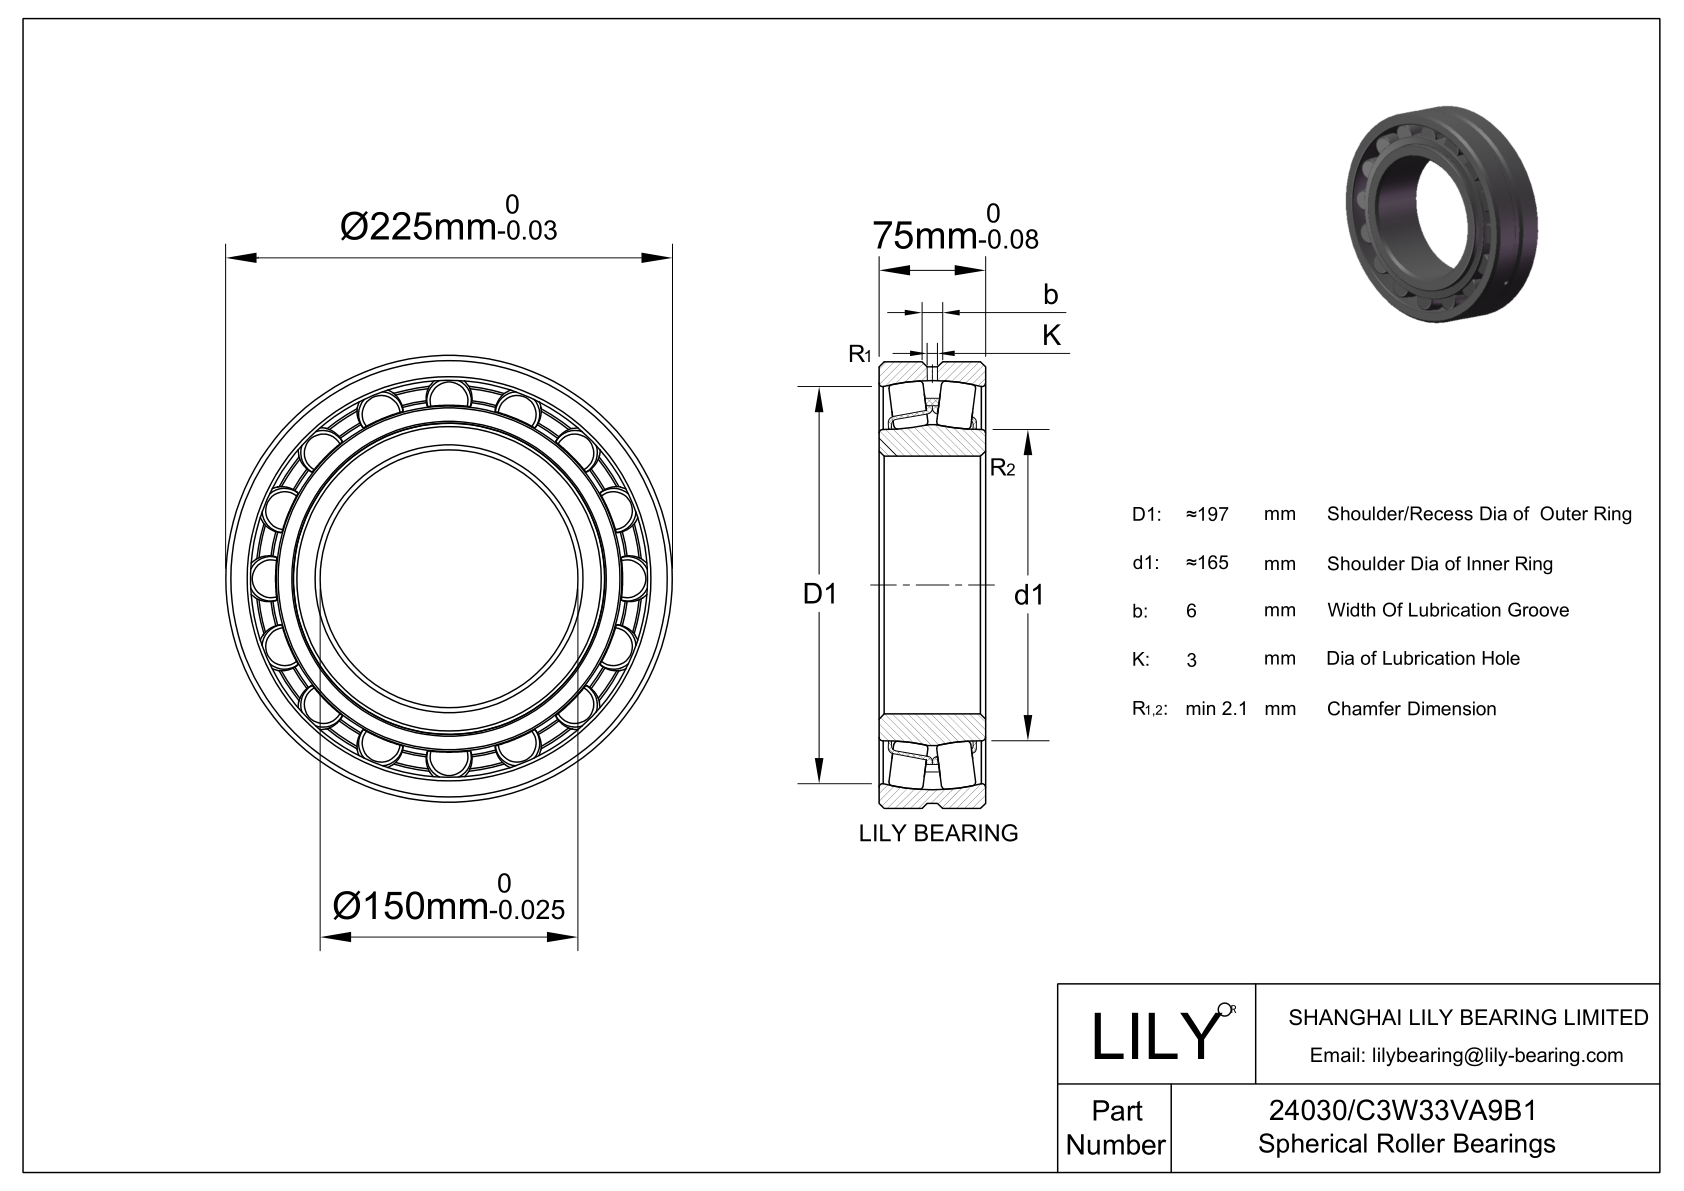 24030/C3W33VA9B1 Double Row Spherical Roller Bearing cad drawing